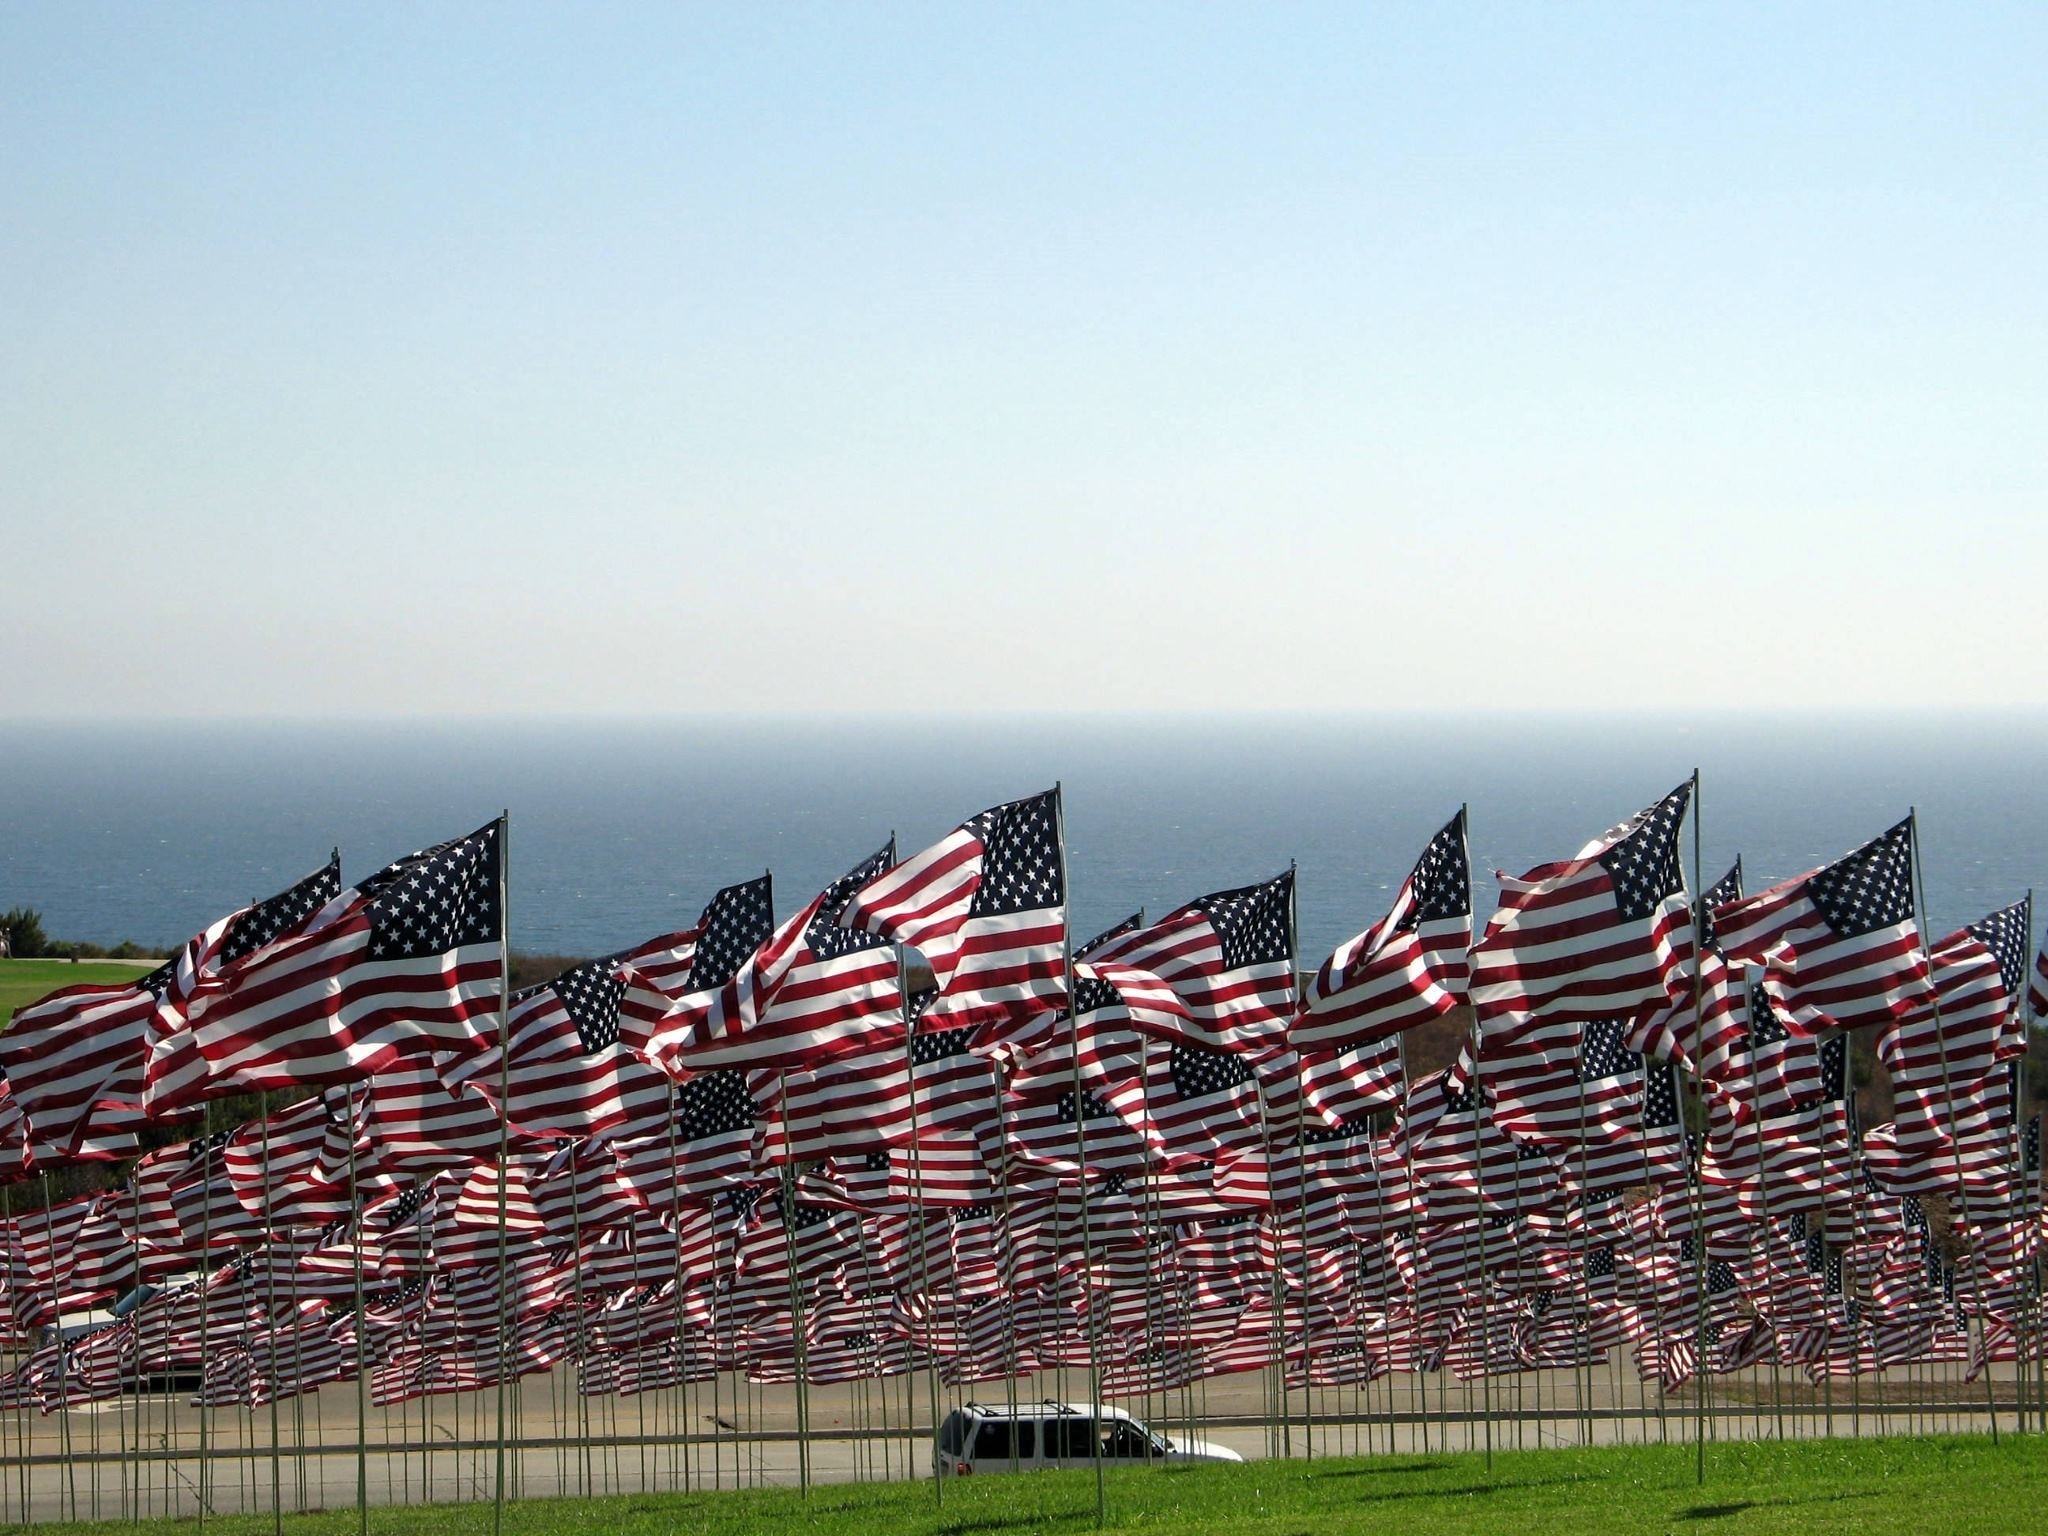 In 2008, I entered my freshman year at Pepperdine University.  That year, one of my most beloved traditions began in the creation of what is now a #localgem of Malibu.  Each September, Pepperdine University honors the men and women whose lives were lost on September 11, 2001 with the "Wave of Flags."  One full size flag is flown for each individual who lost his or her life.  They are represented by home country (which is hard to see in this picture as most were American).  However, if you get a chance to walk through the flags, you'll notice flags from dozens of countries.